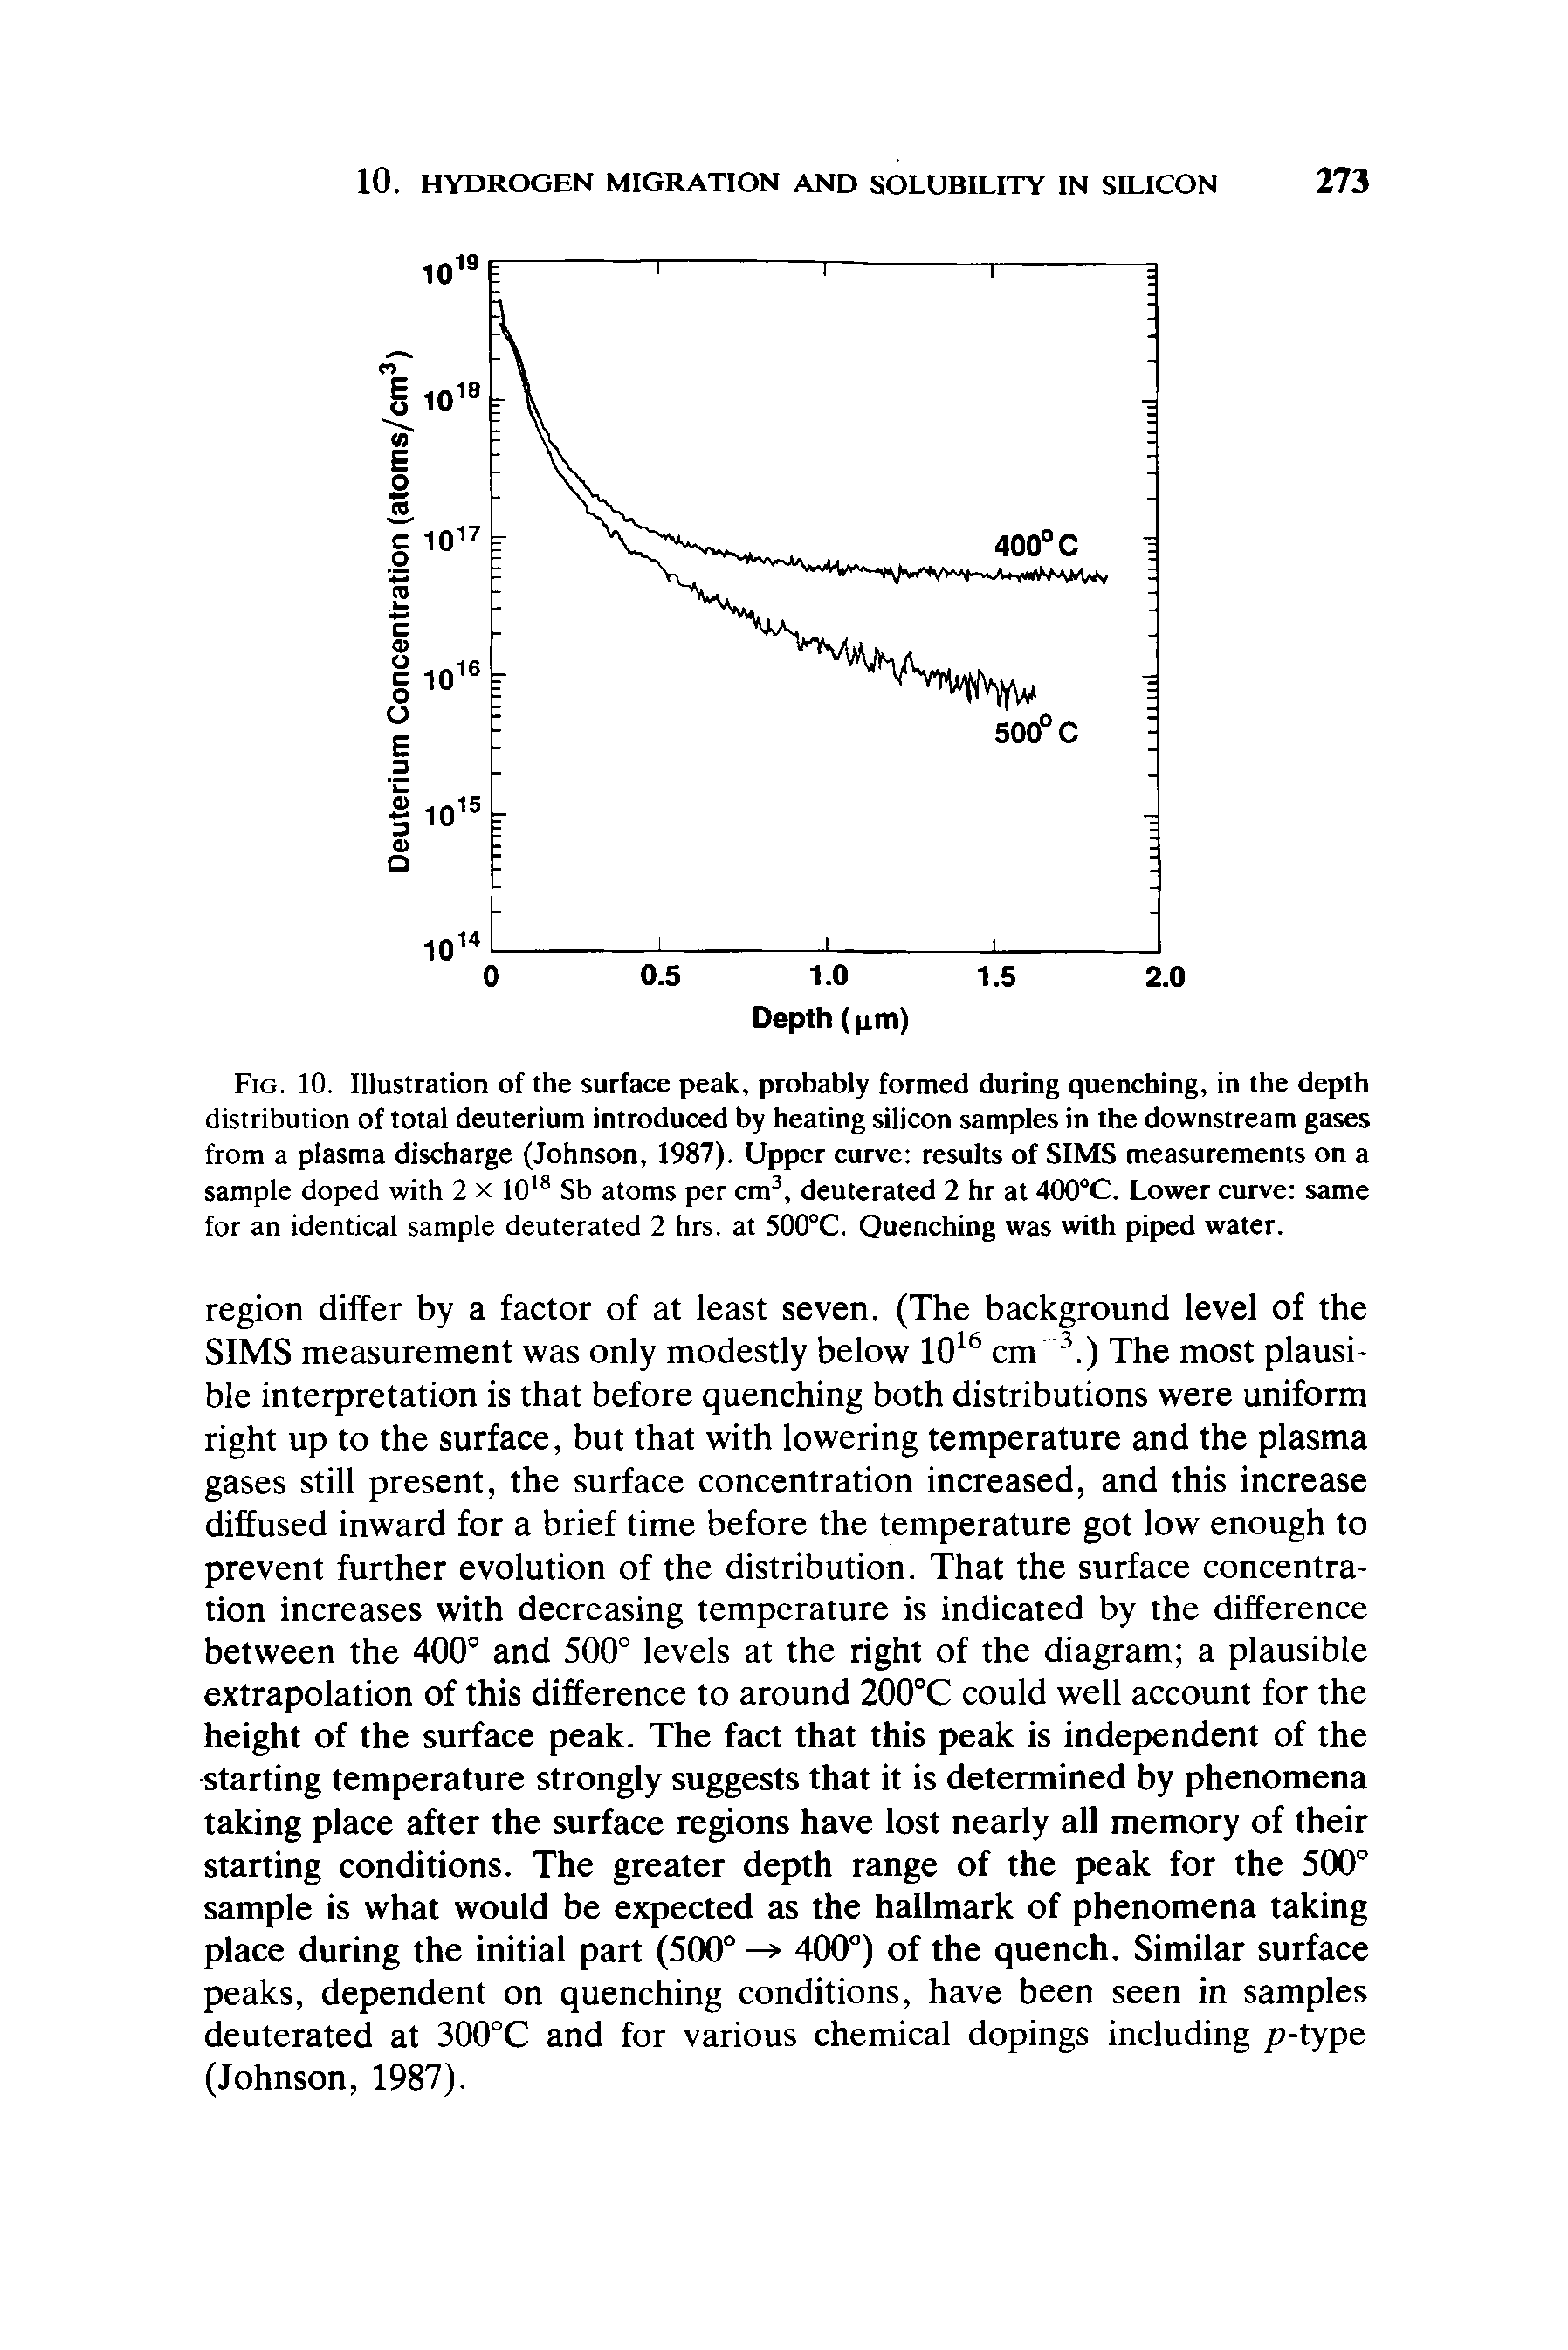 Fig. 10. Illustration of the surface peak, probably formed during quenching, in the depth distribution of total deuterium introduced by heating silicon samples in the downstream gases from a plasma discharge (Johnson, 1987). Upper curve results of SIMS measurements on a sample doped with 2 x 10ls Sb atoms per cm3, deuterated 2 hr at 400°C. Lower curve same for an identical sample deuterated 2 hrs. at 500°C. Quenching was with piped water.